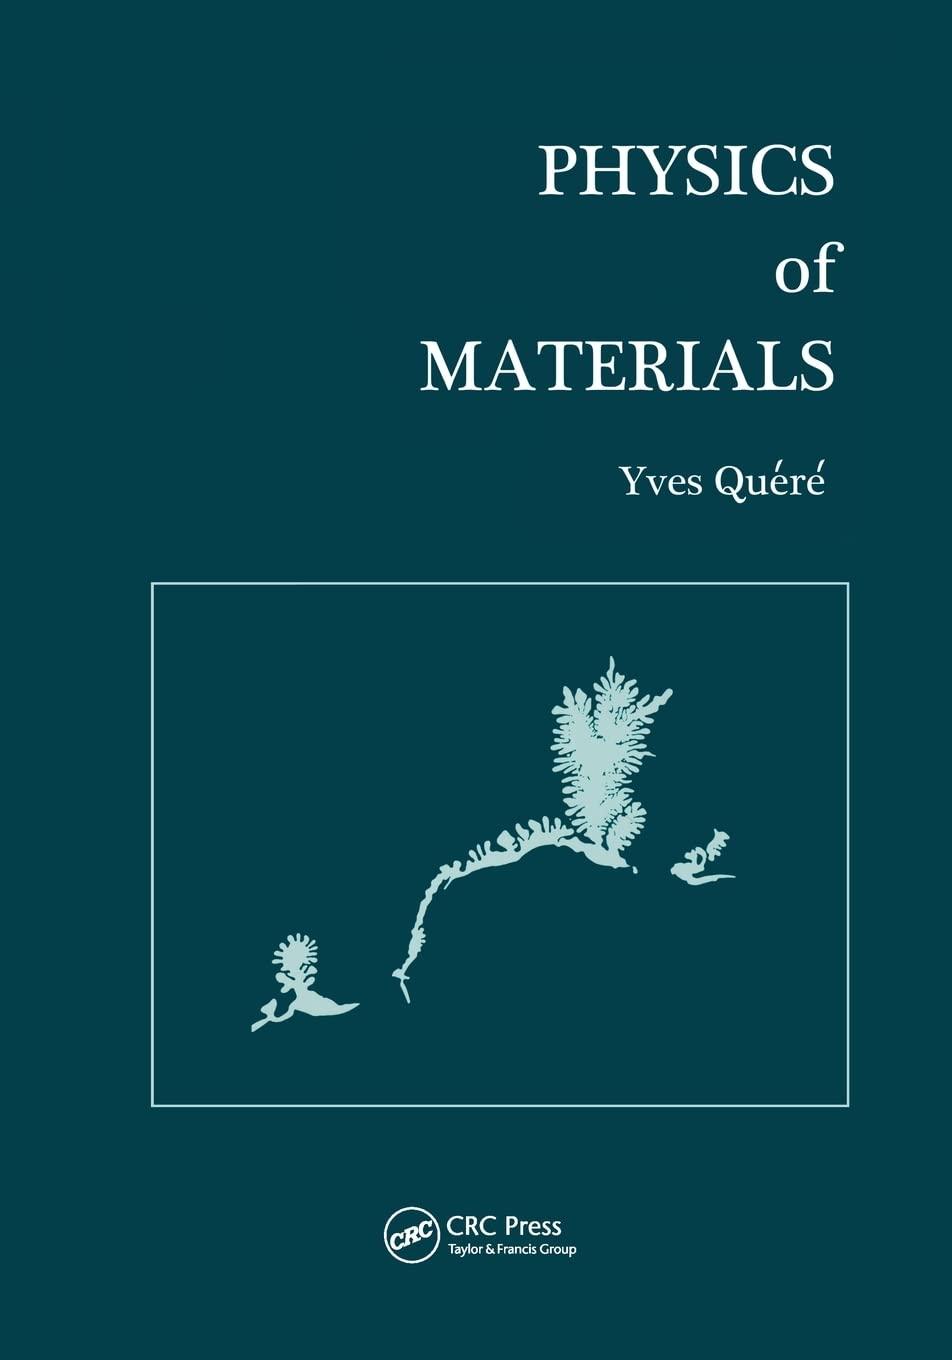 physics of materials 1st edition yves quere 9056991191, 978-9056991197